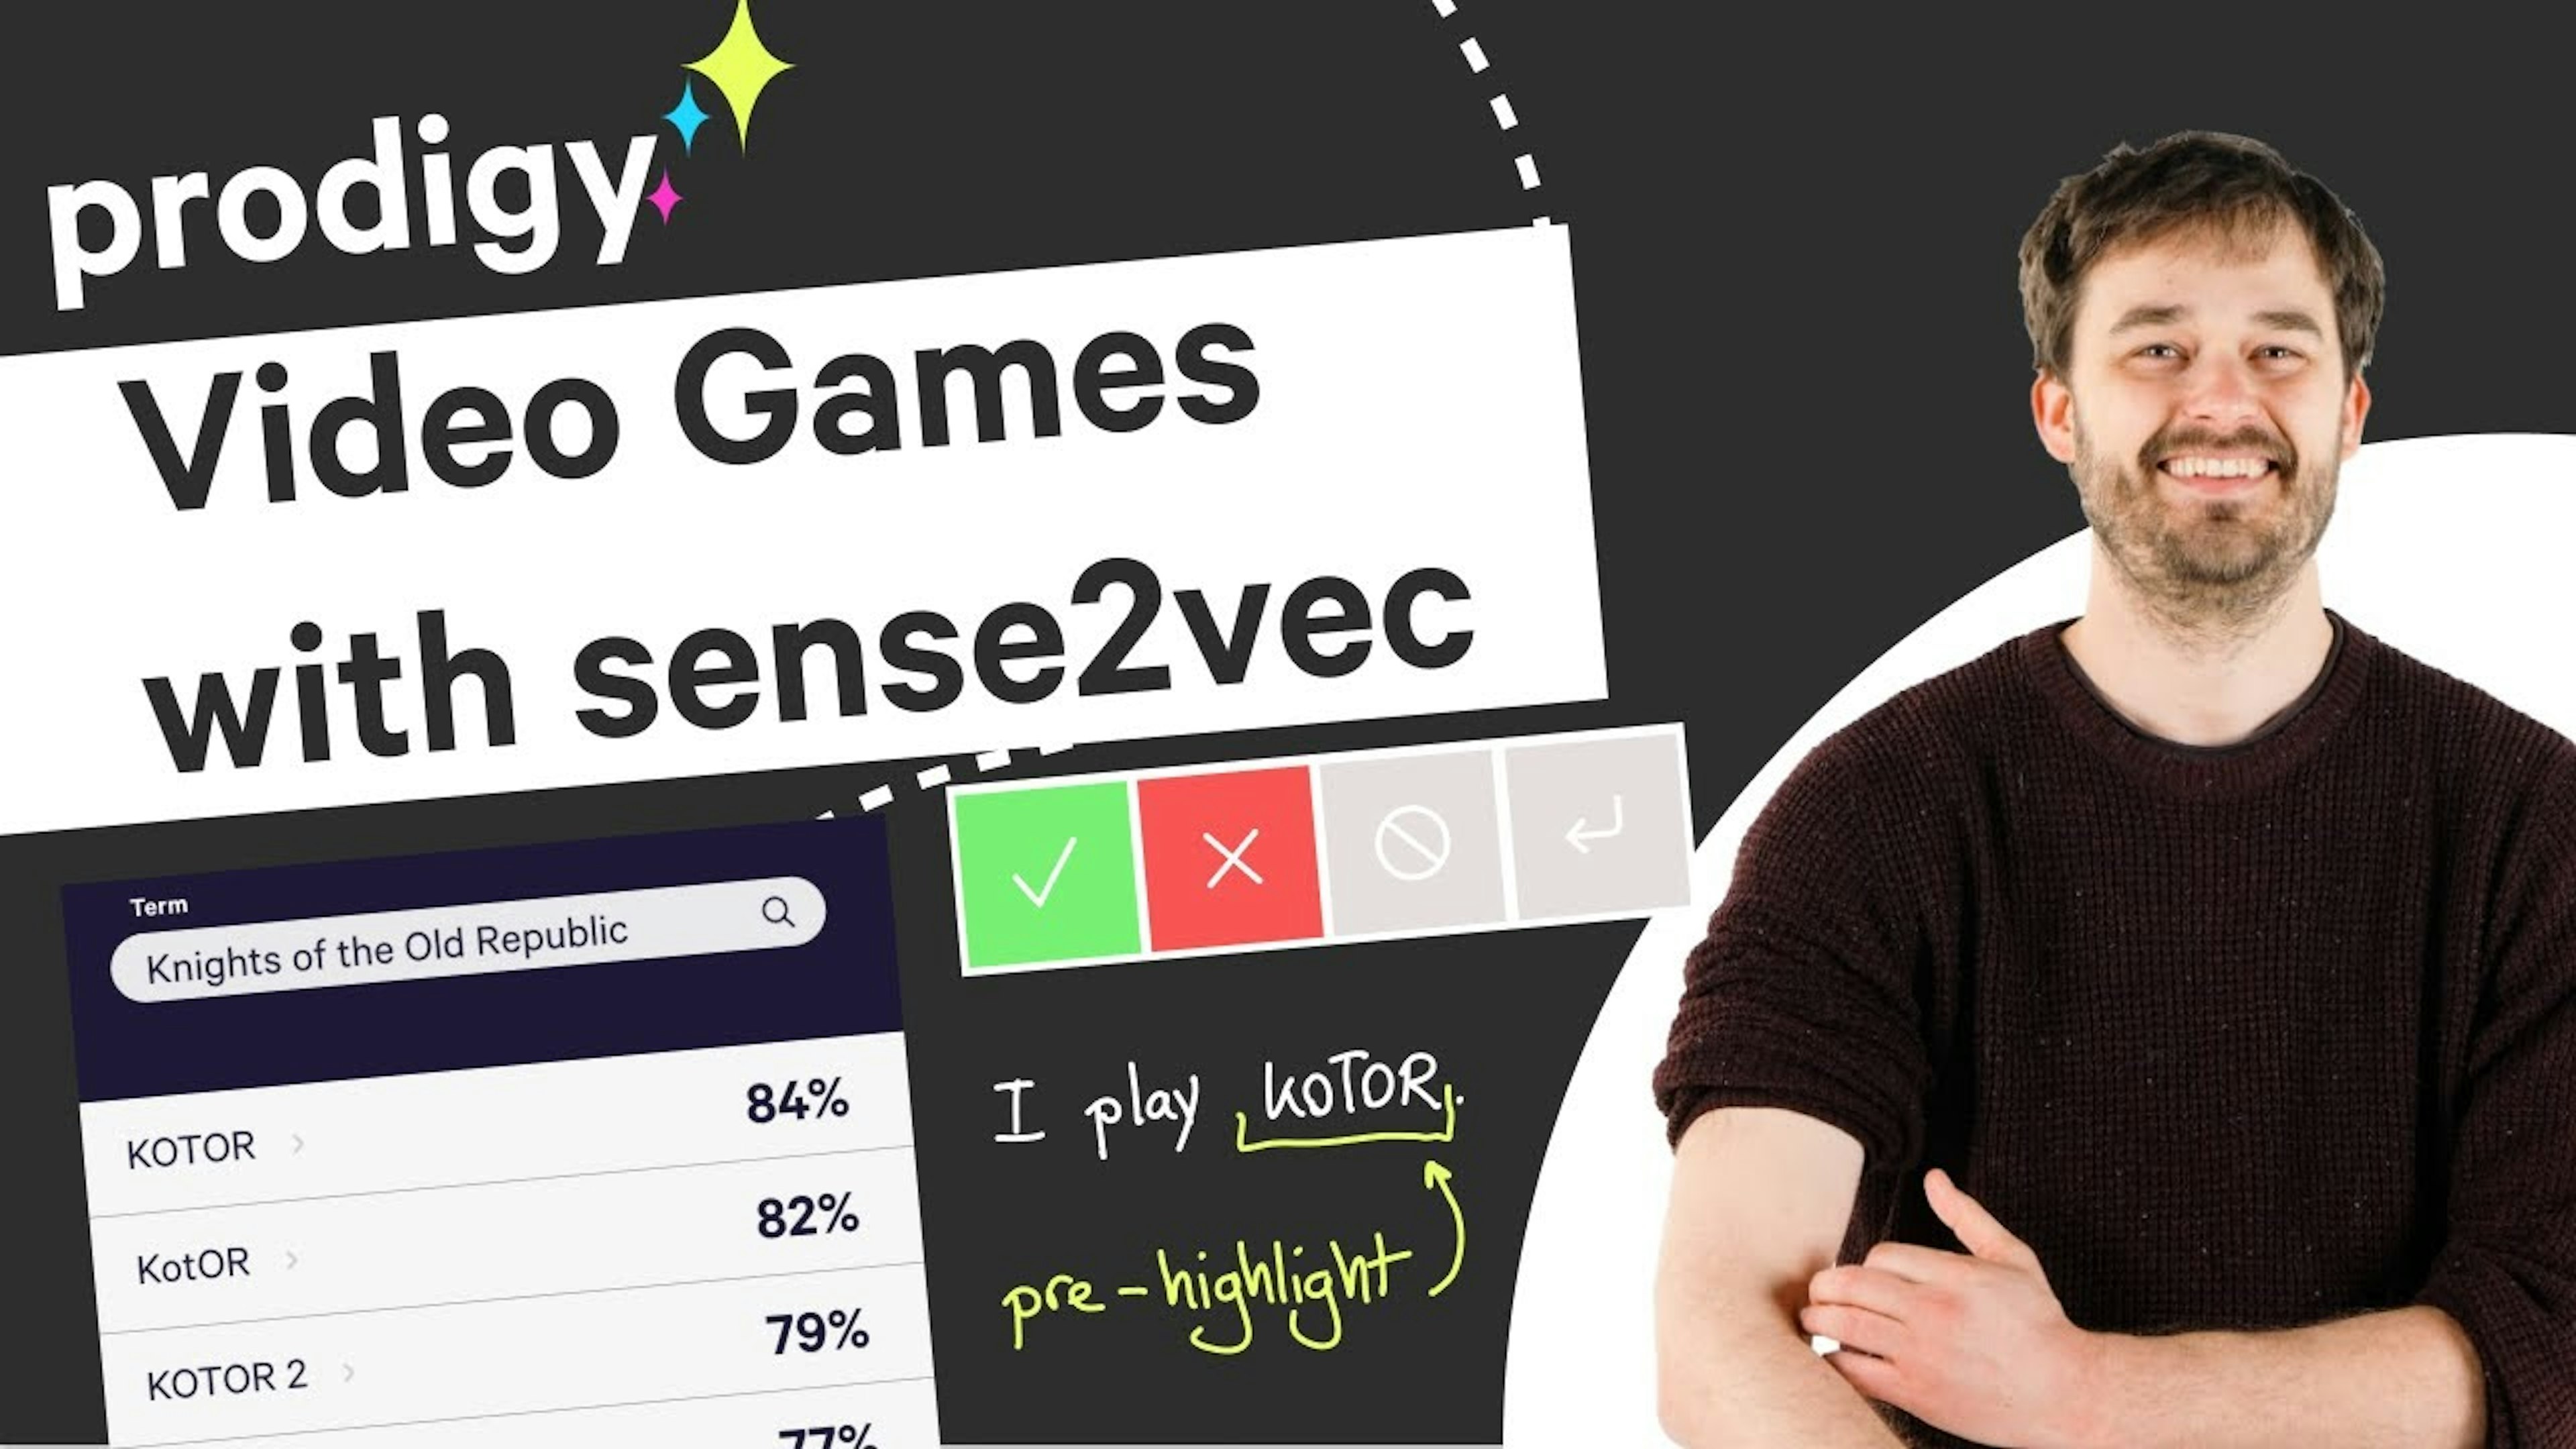 Finding Video Games with Sense2Vec